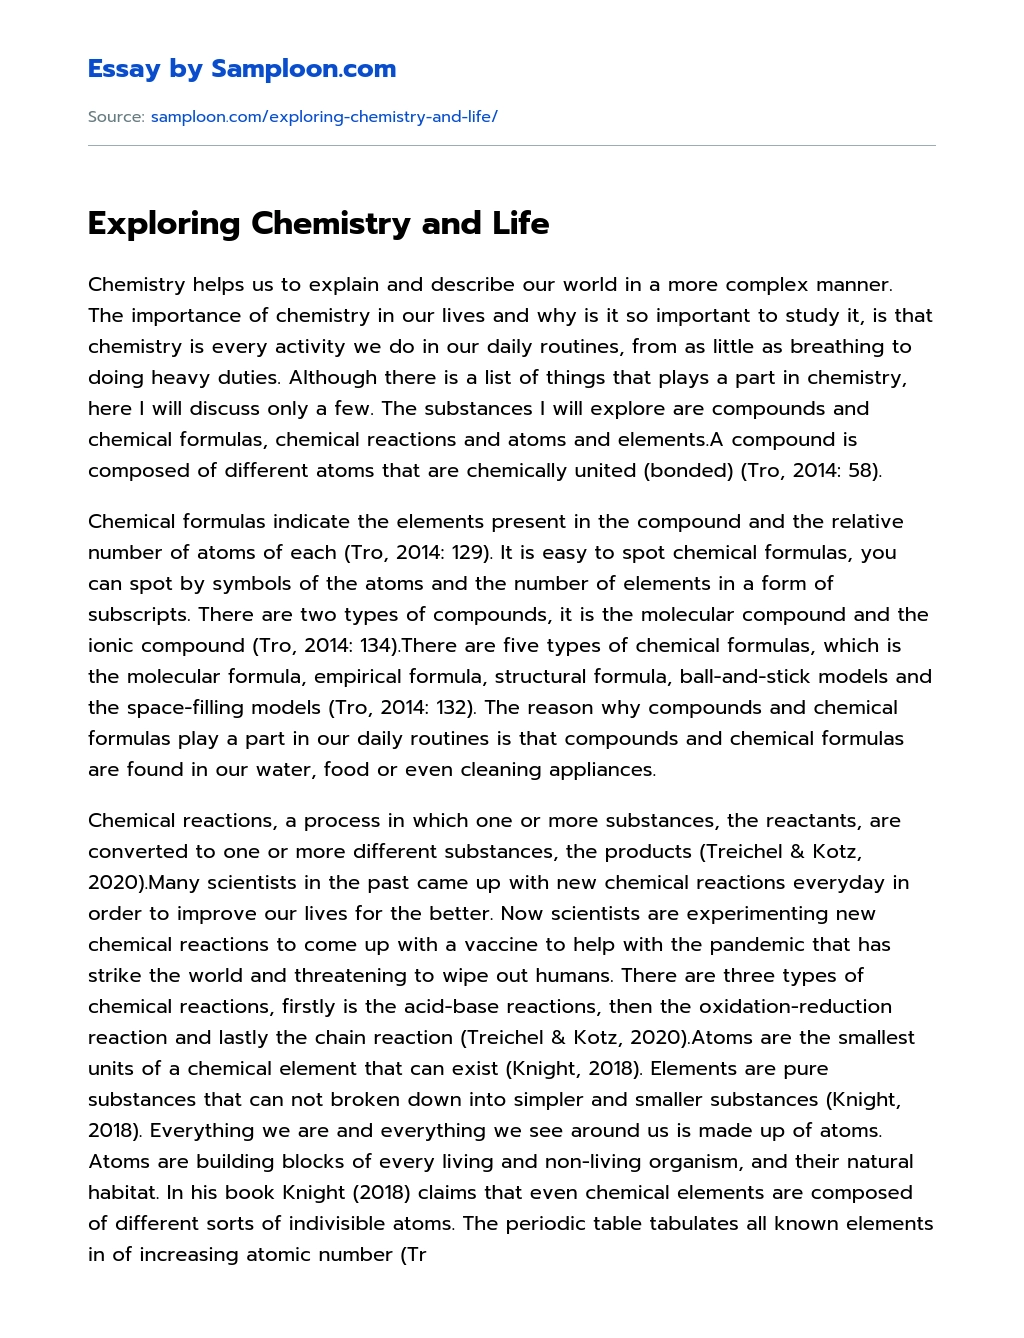 Exploring Chemistry and Life essay